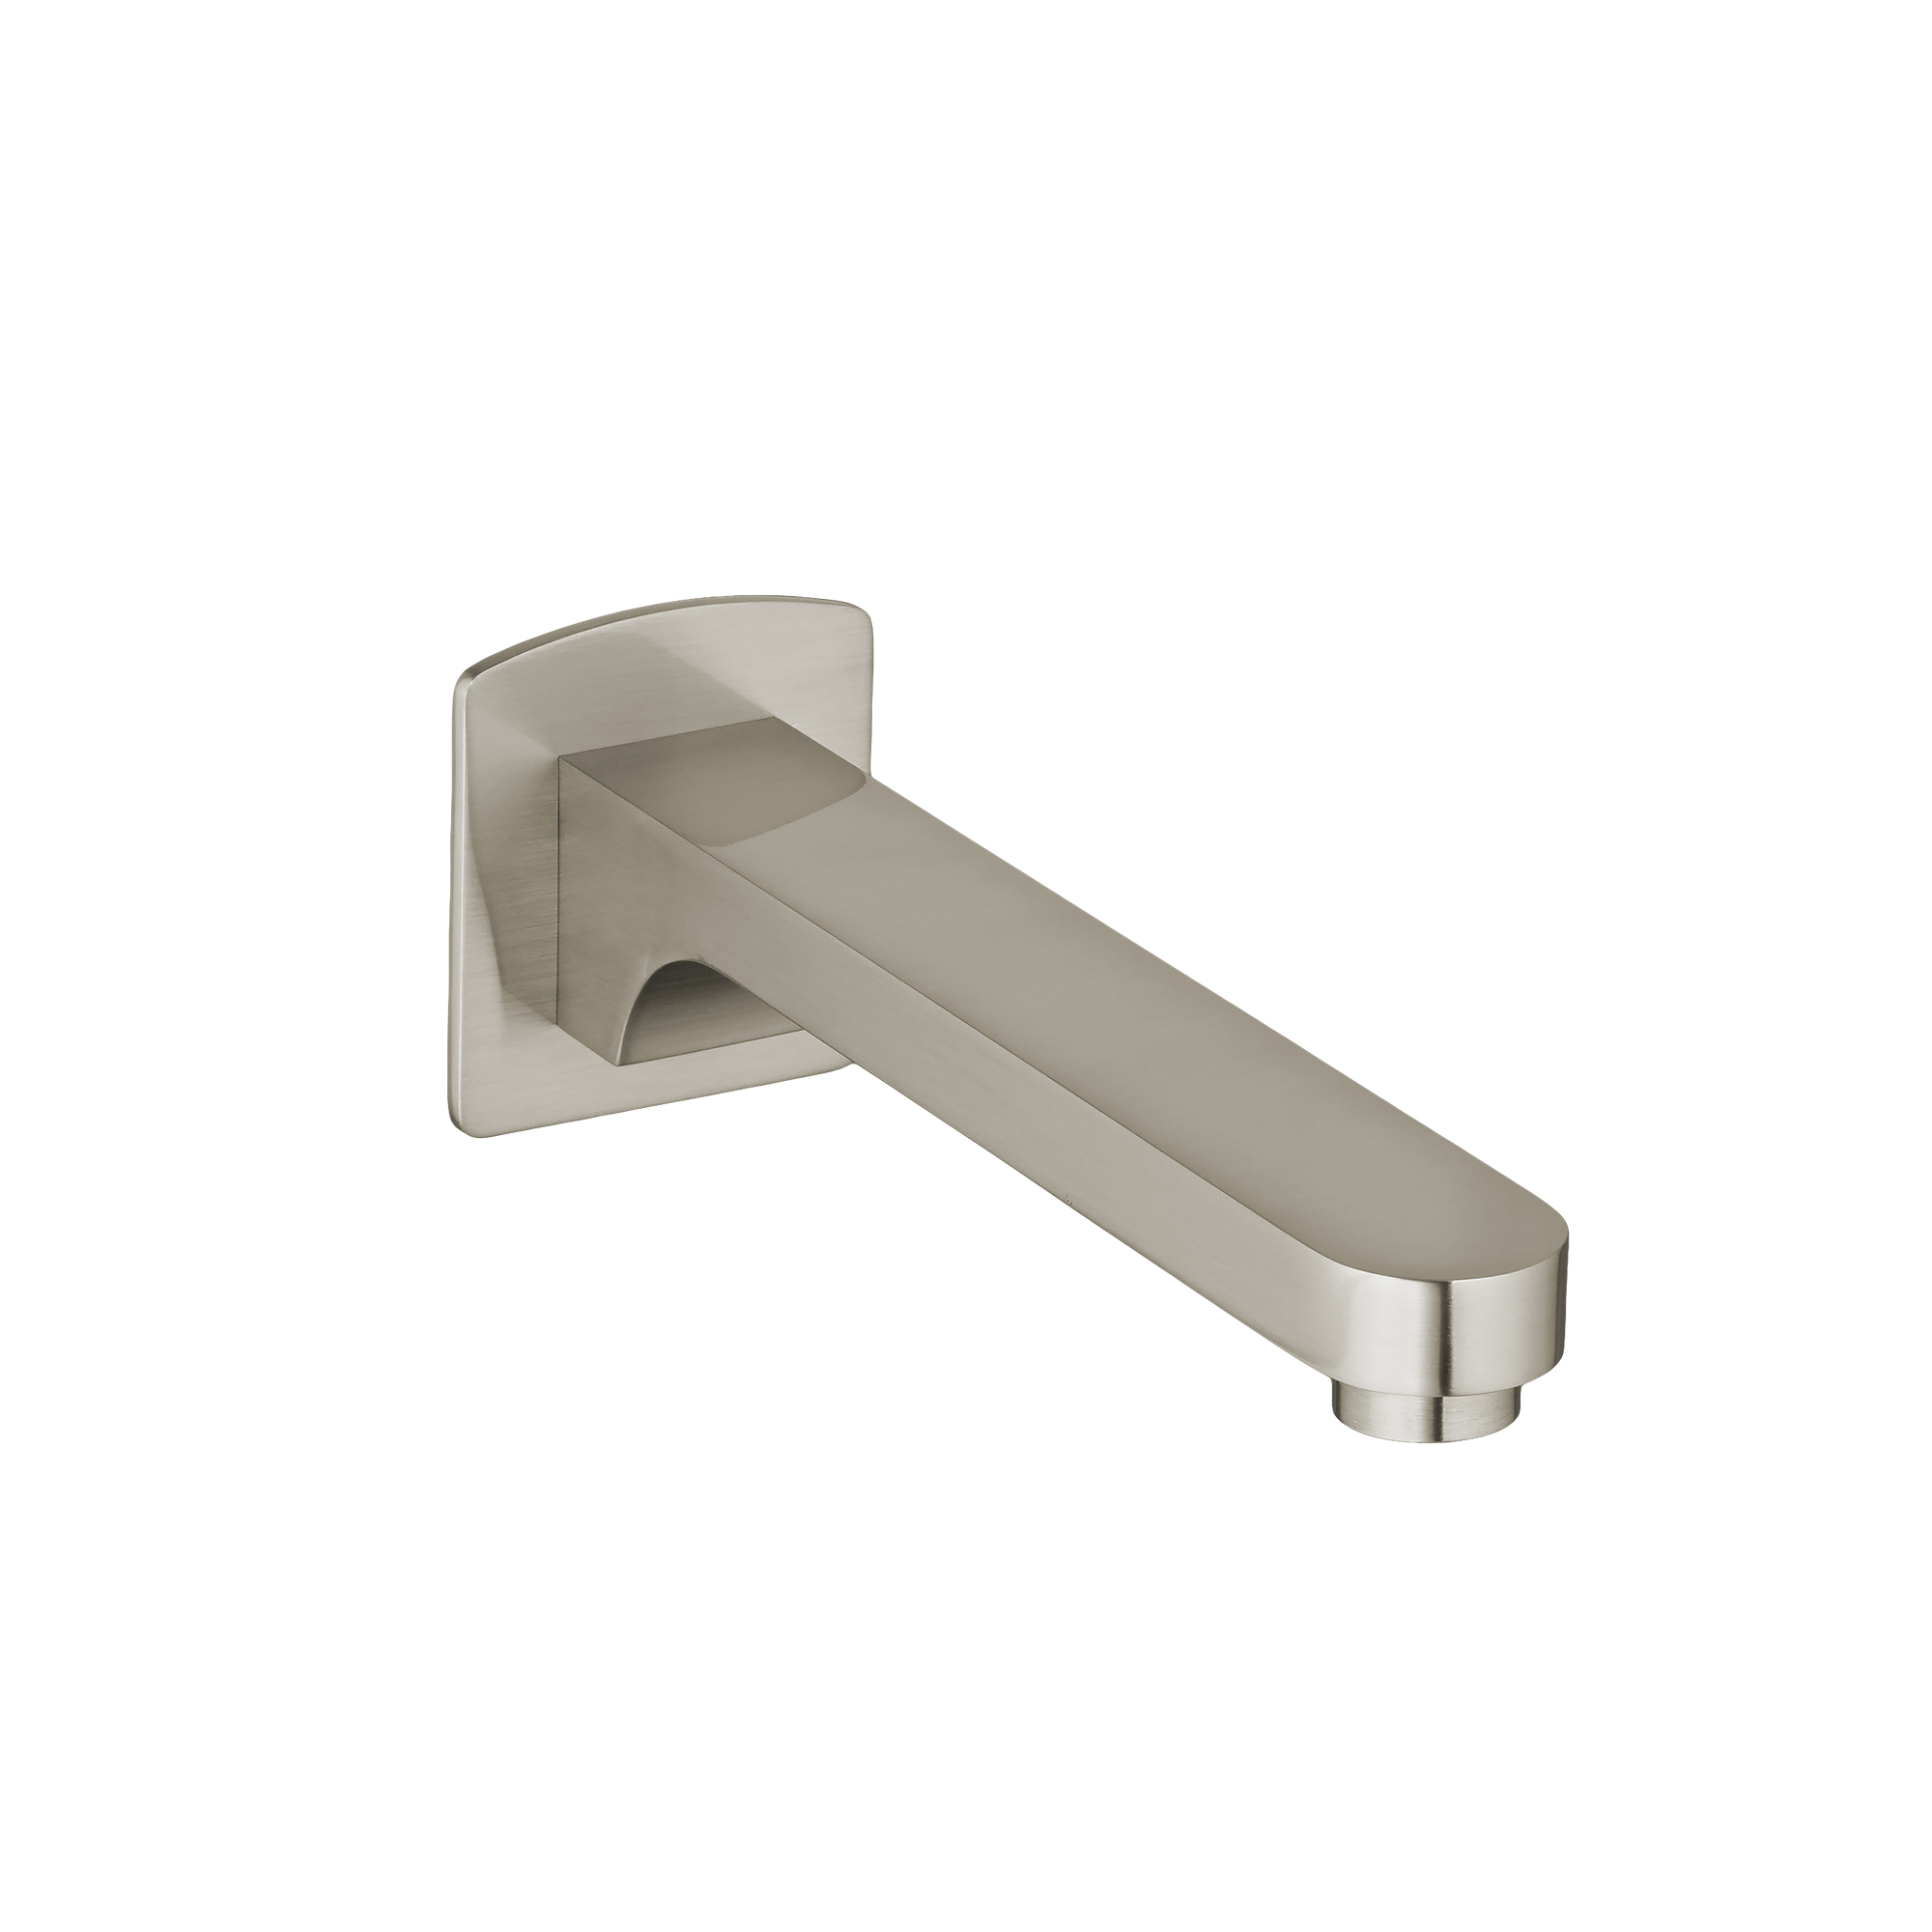 Equility Wall Mount Bathtub Spout